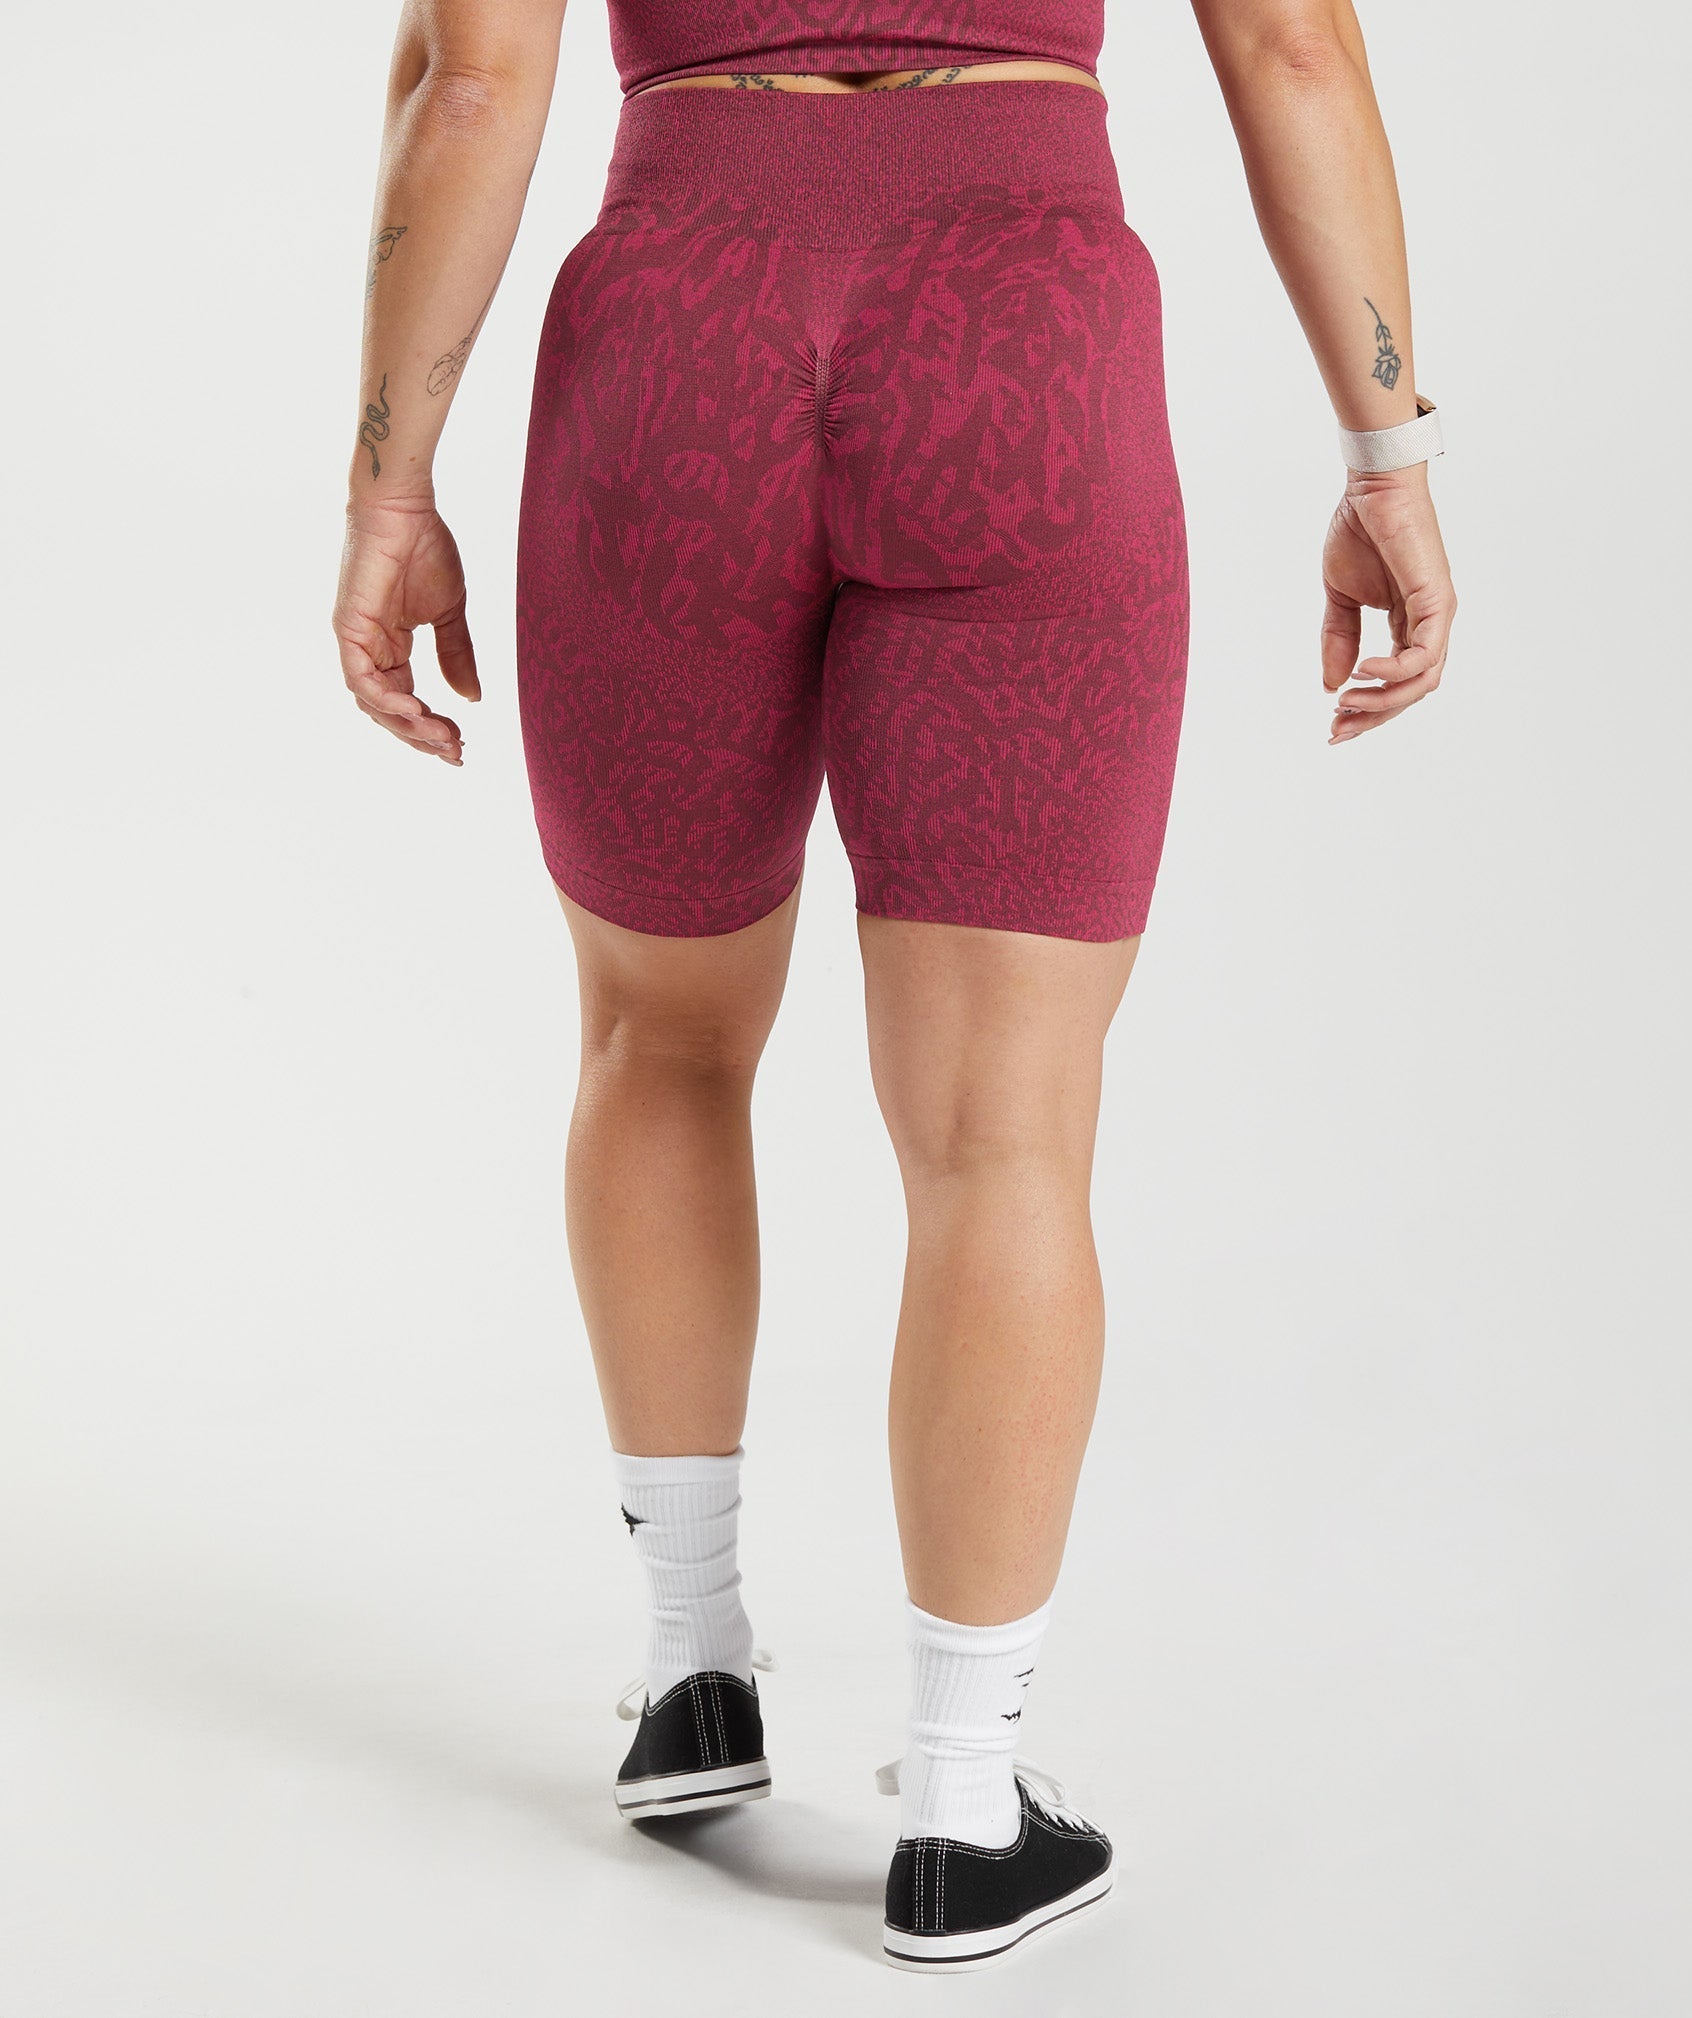 Gymshark training shorts Purple - $27 (10% Off Retail) - From Angel